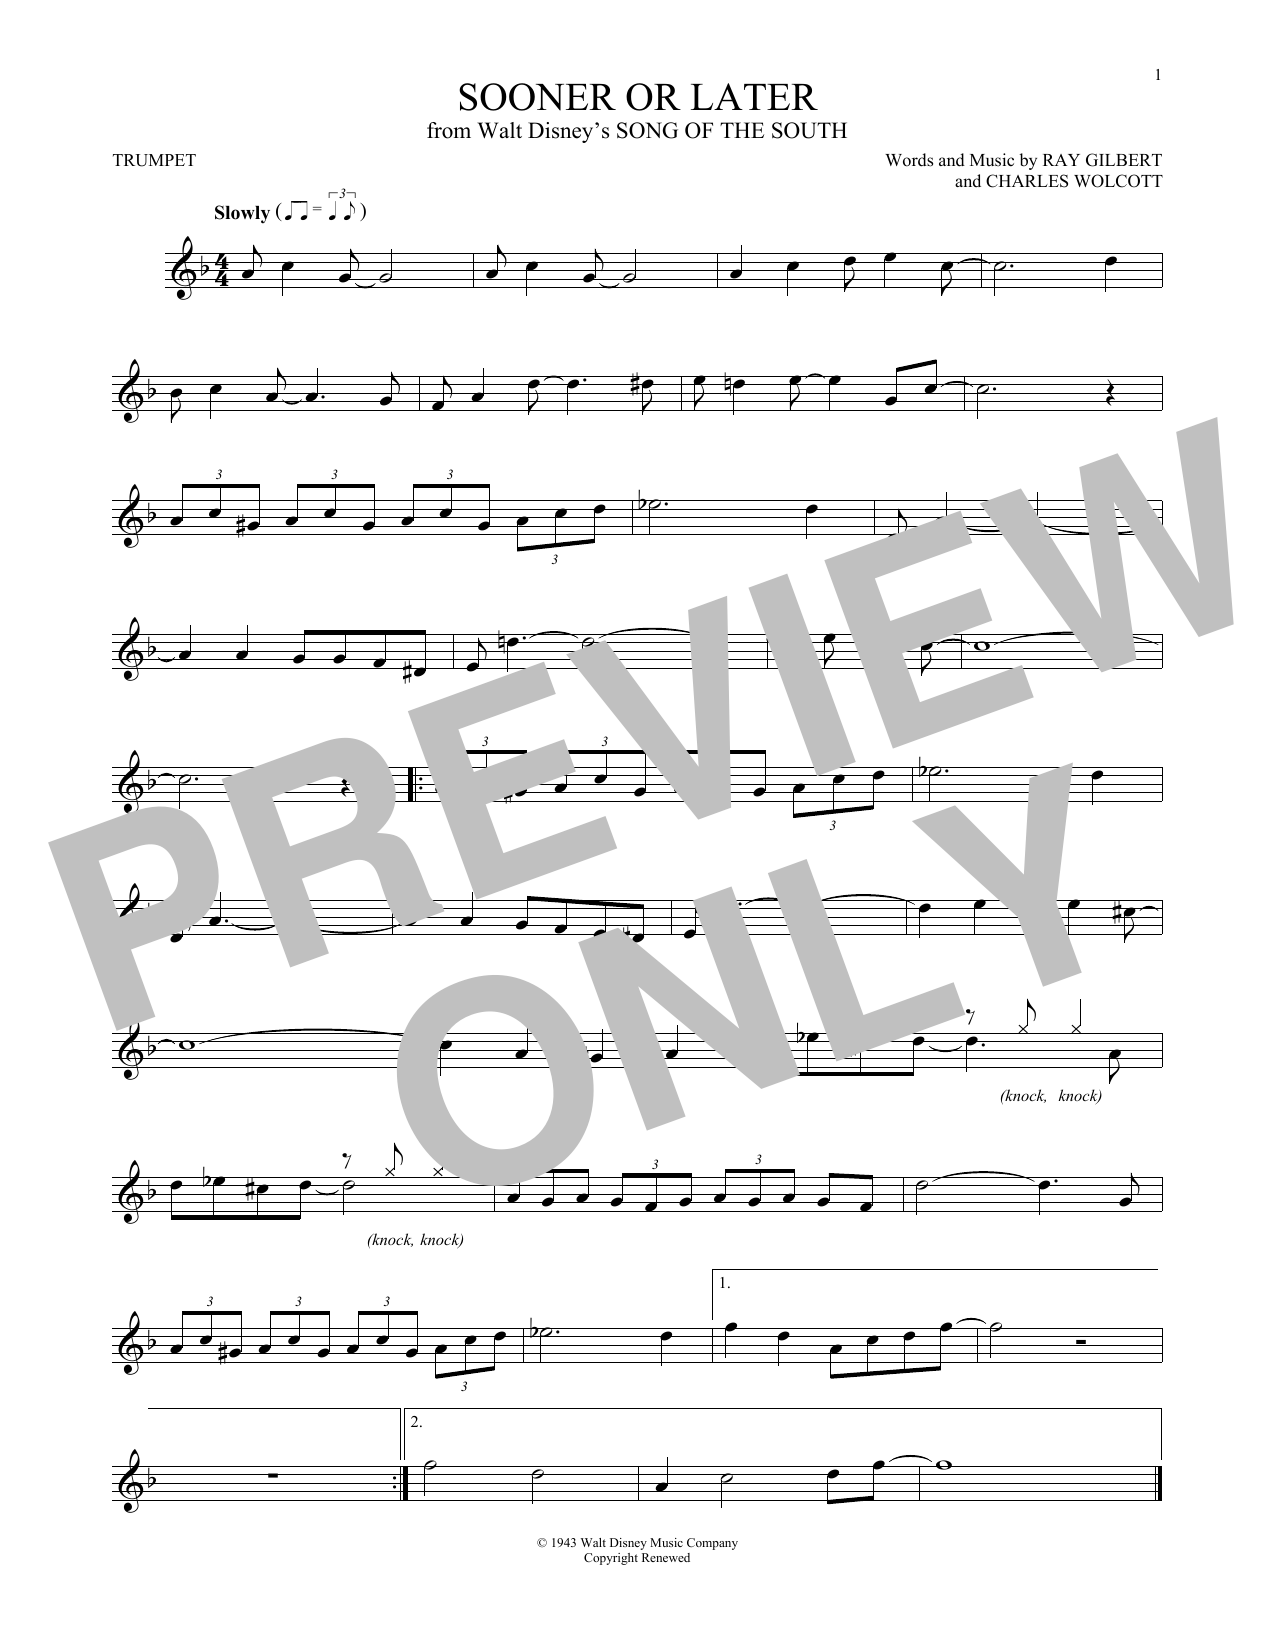 Download Ray Gilbert Sooner Or Later Sheet Music